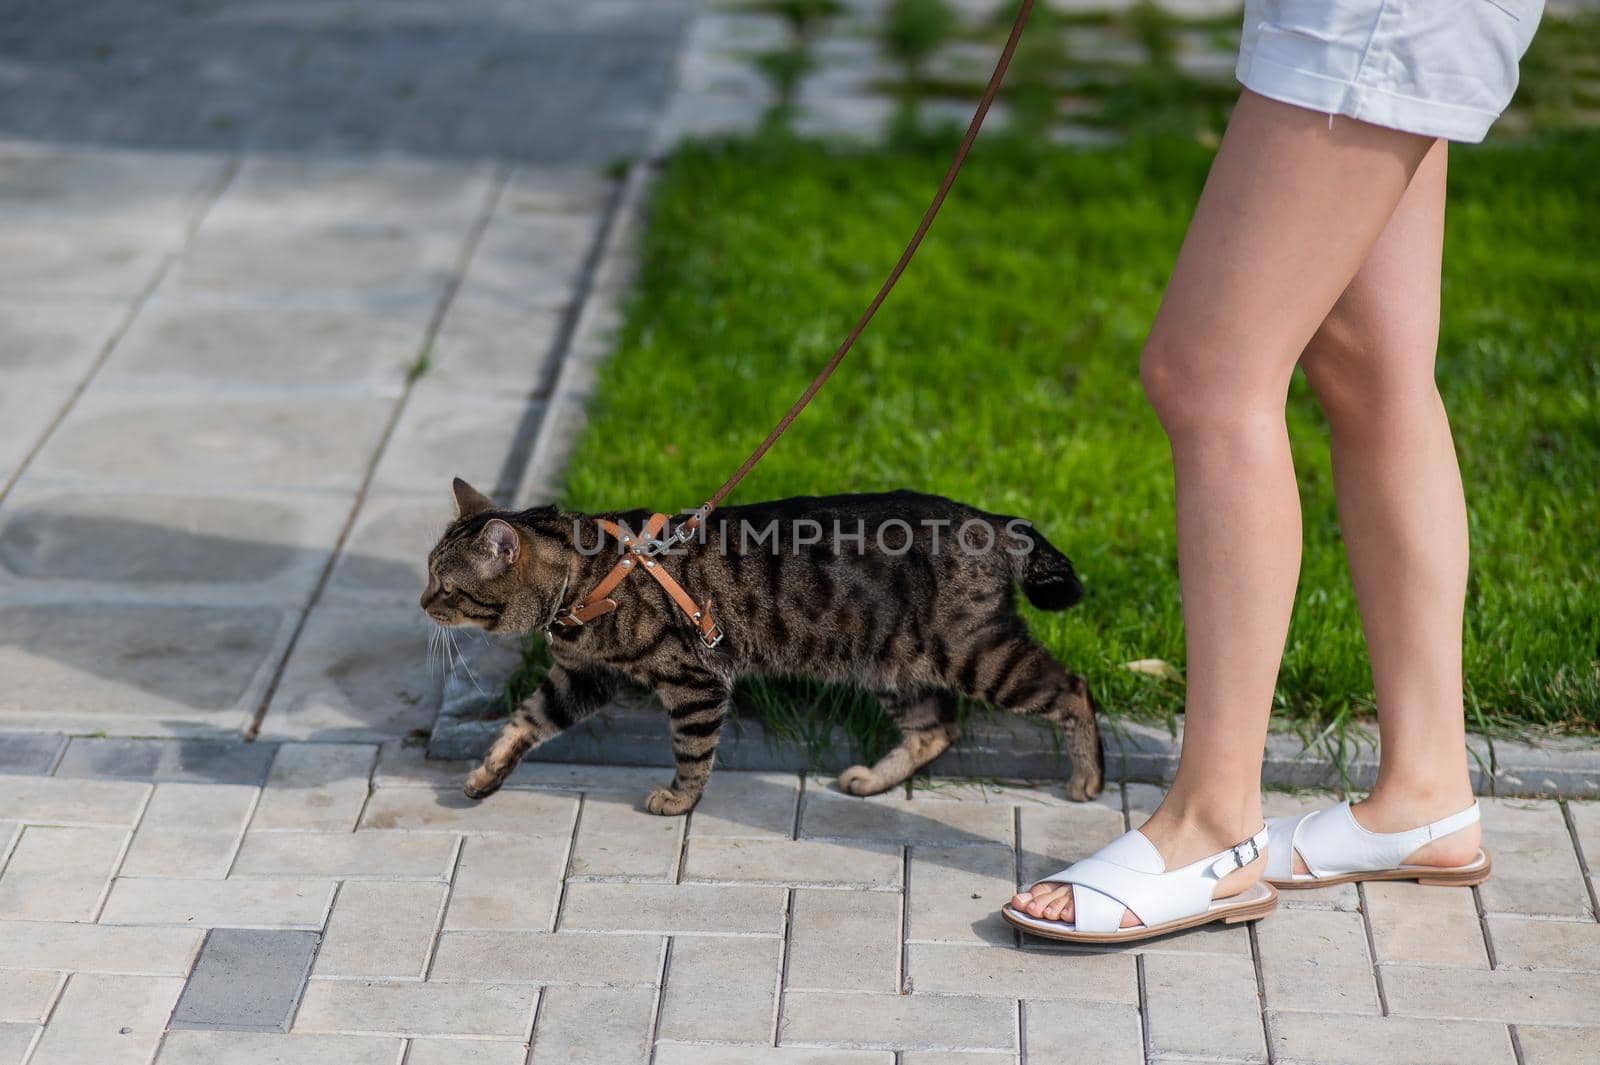 Caucasian woman walking with a cat on a leash outdoors in summer. by mrwed54